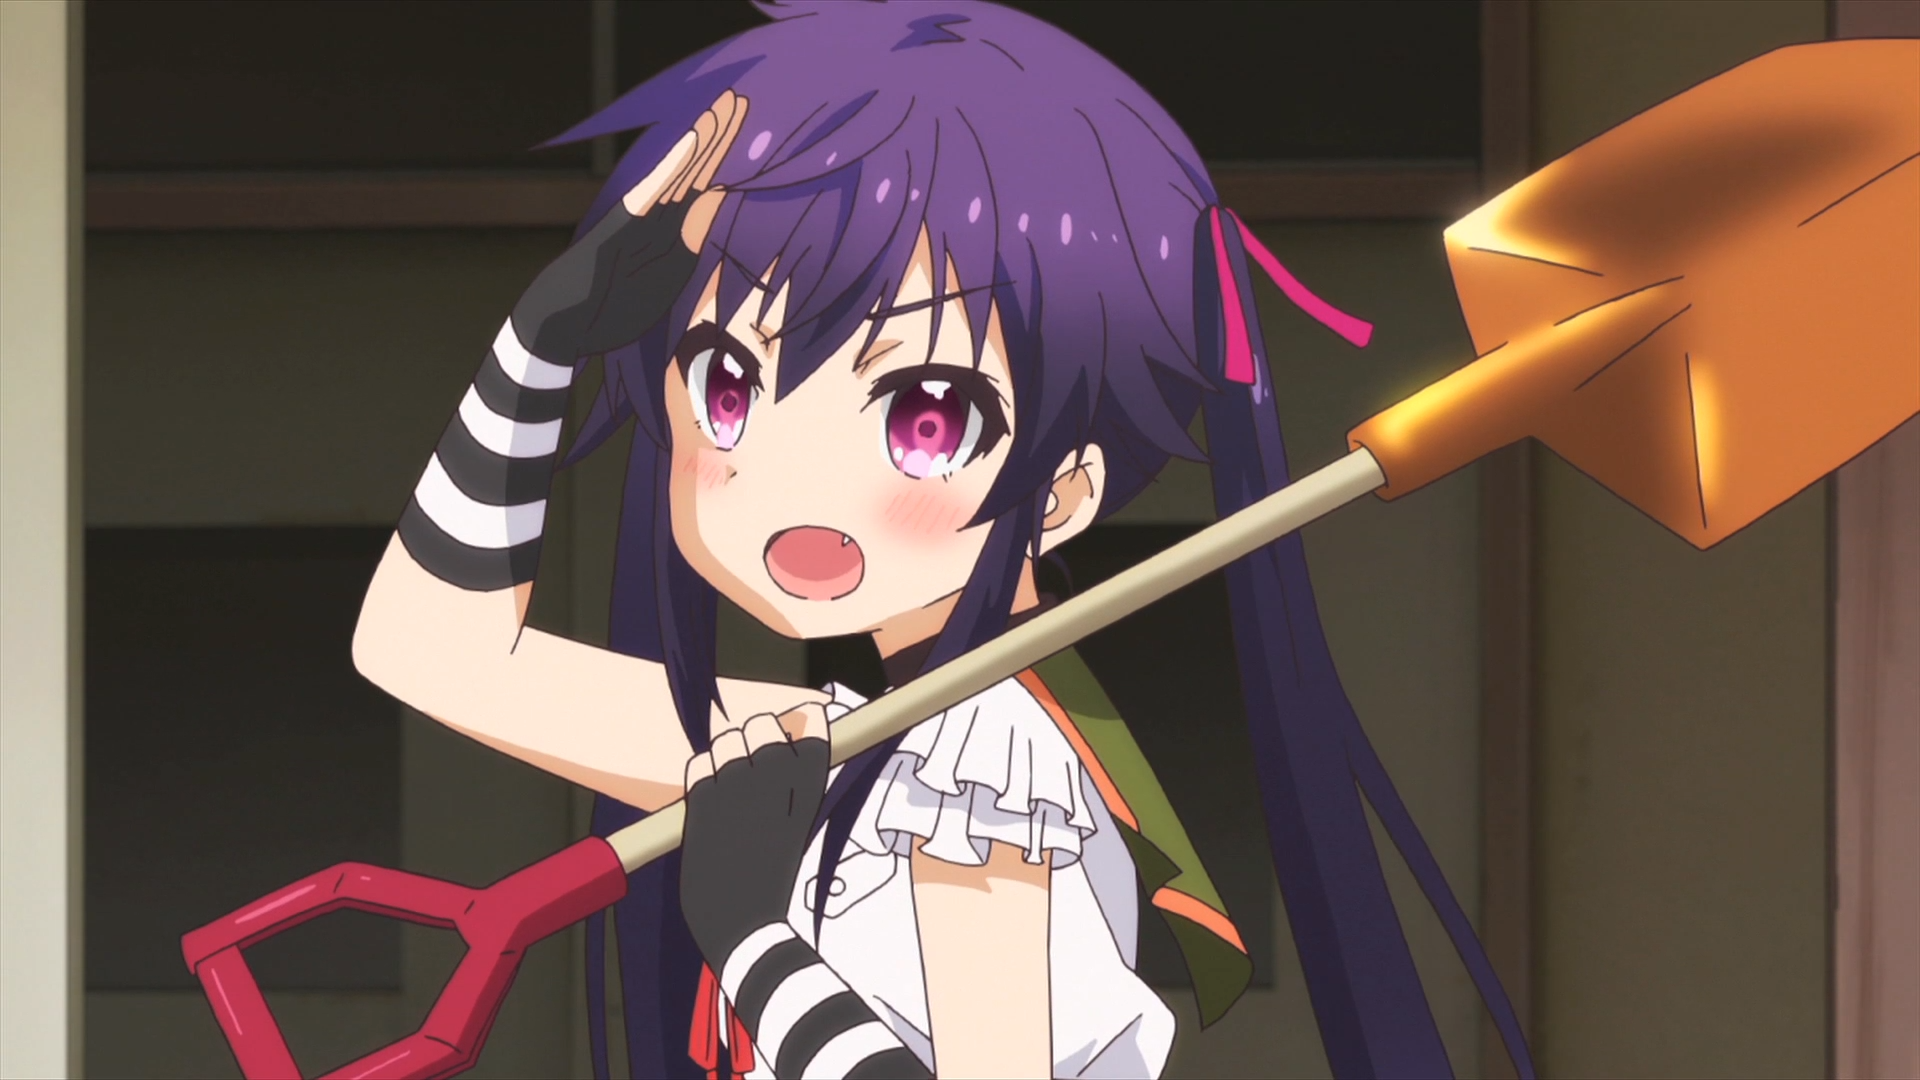 Kurumi Ebisuzawa hoists her shovel and salutes as she prepares to venture out into the zombie-infested school in a scene from the SCHOOL-LIVE! TV anime.